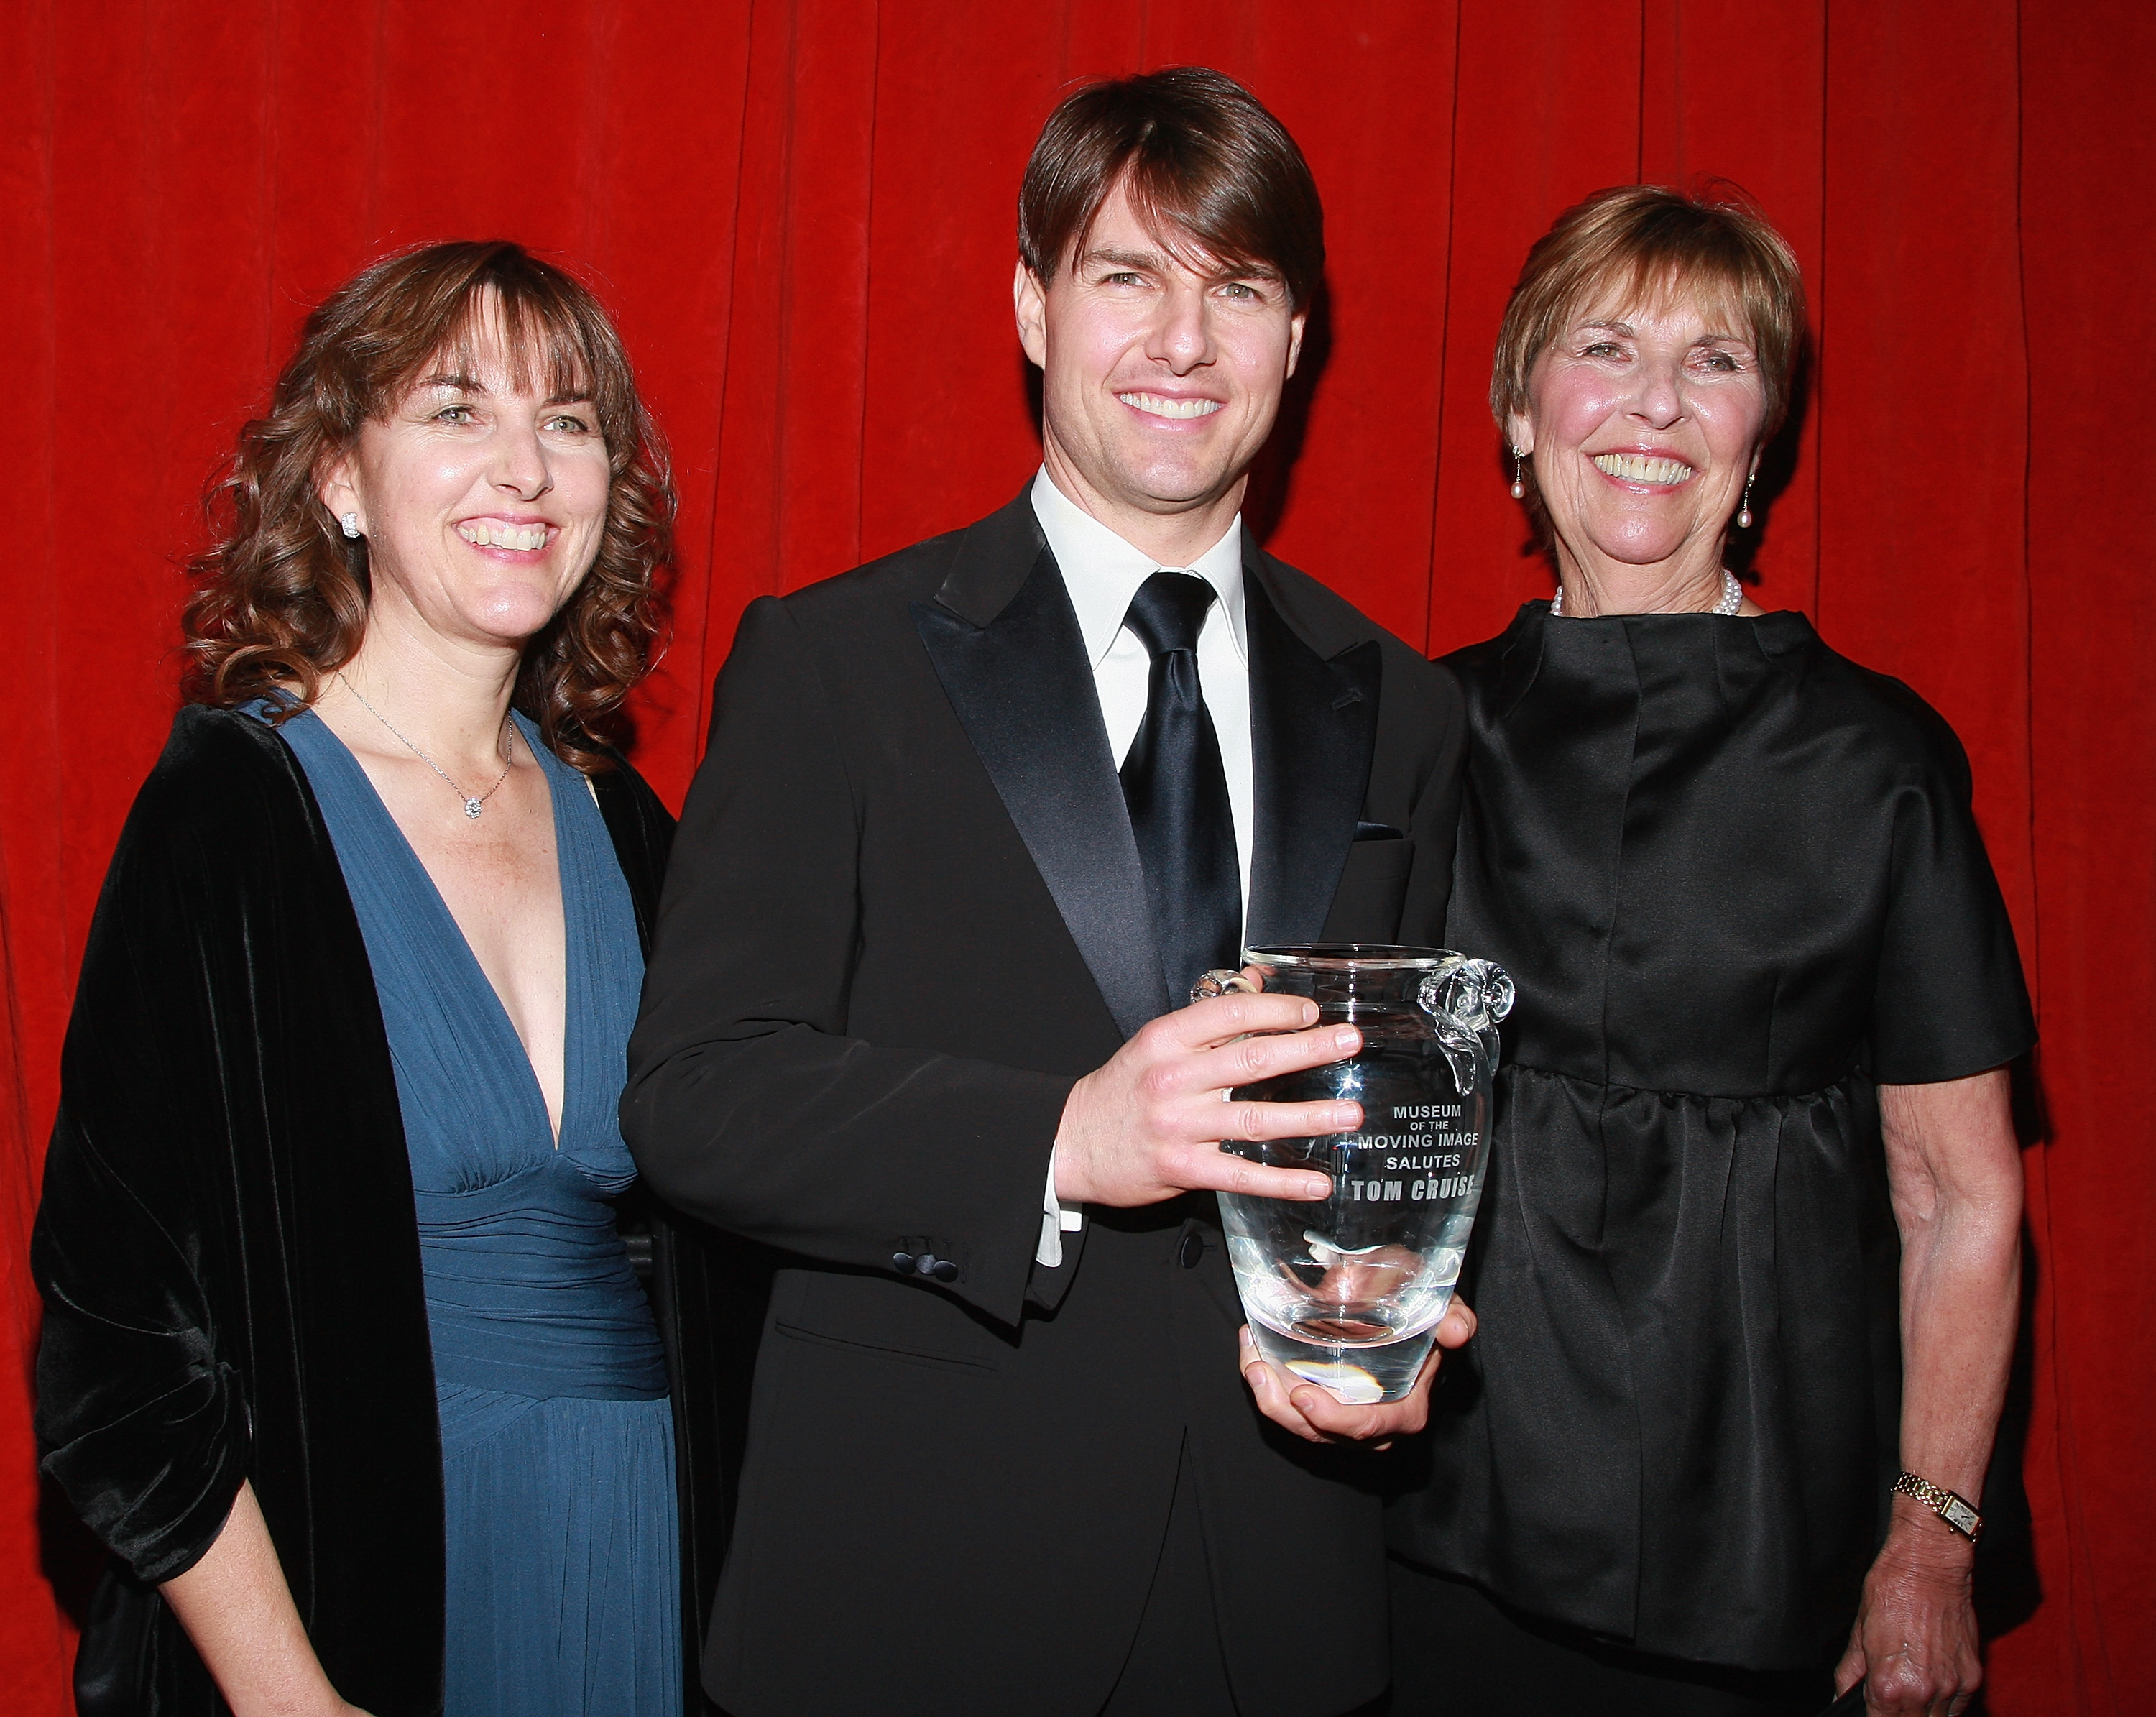 Lee Anne DeVette, Tom Cruise und Mary Lee Pfeiffer beim 23rd Annual Museum of the Moving Image Black Tie Salute in New York City, 2007 | Quelle: Getty Images